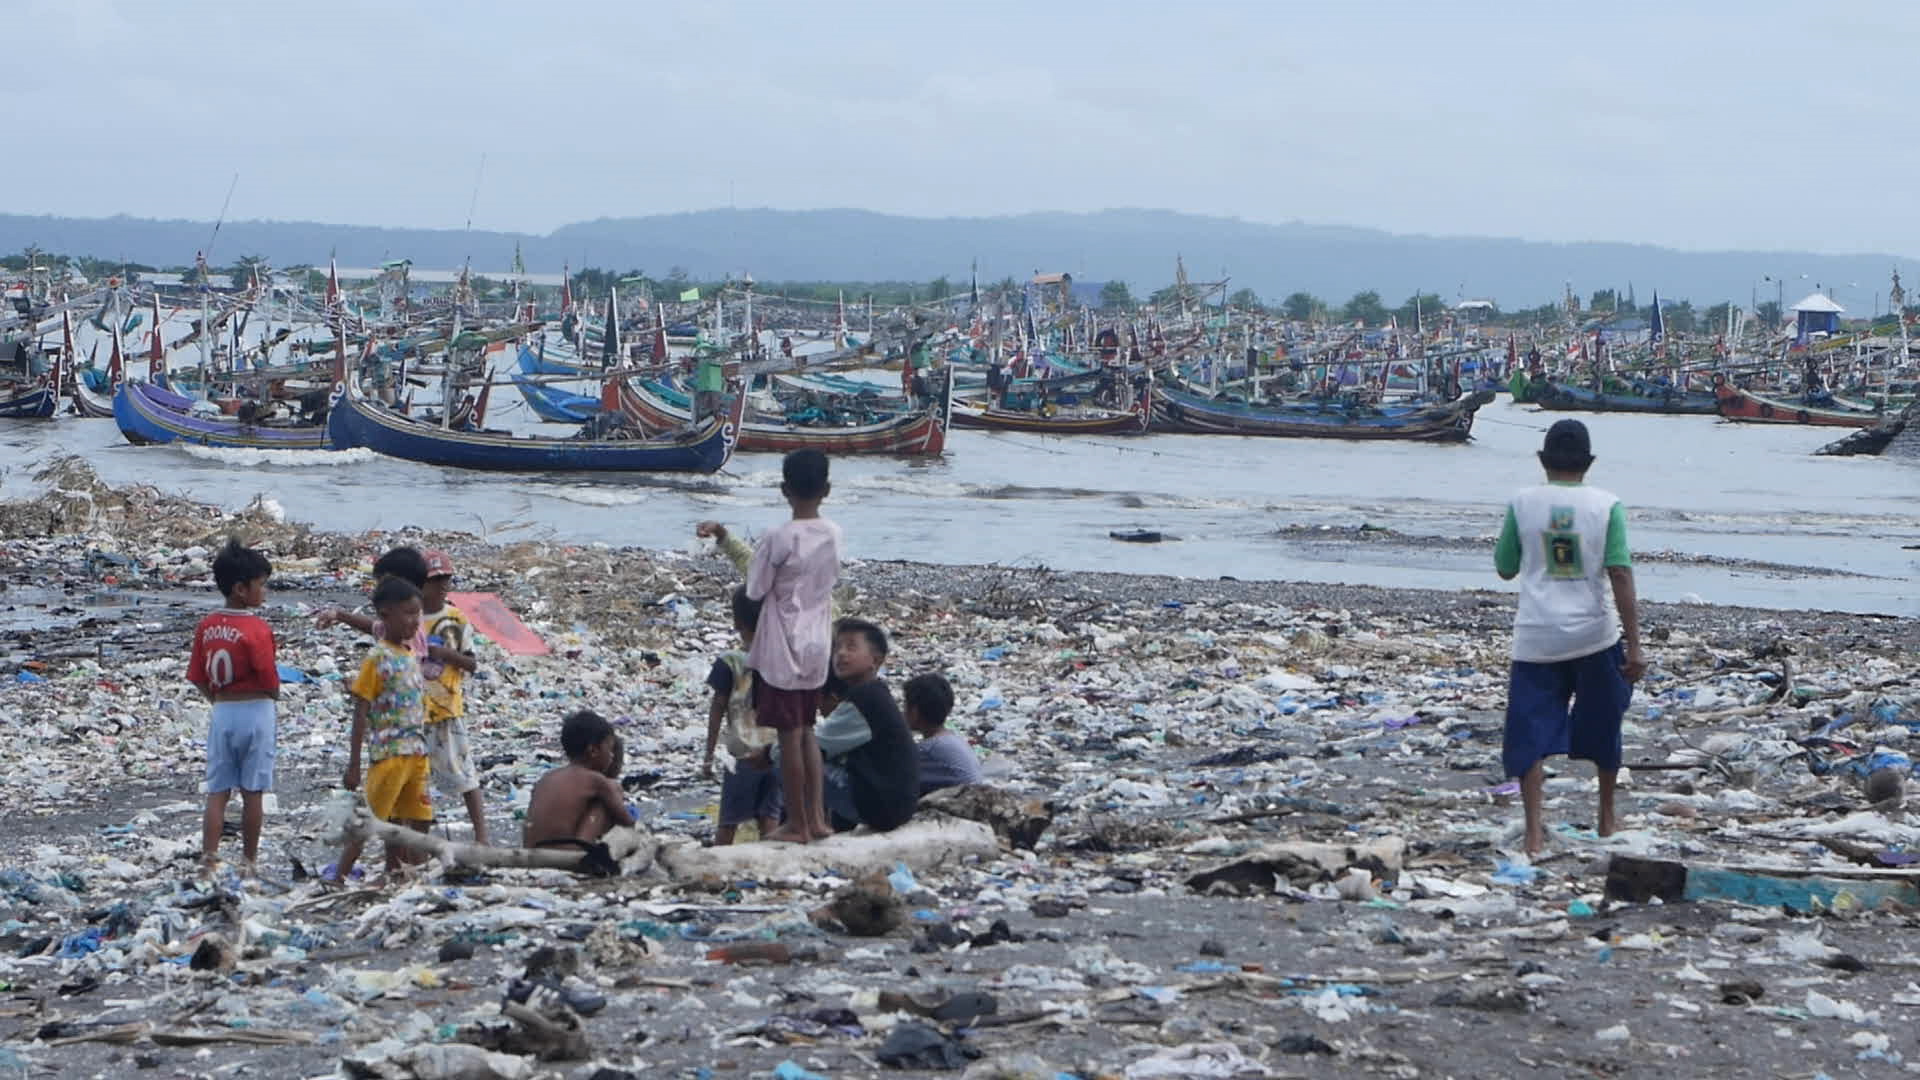 People stand on a beach full of trash looking at boats in water